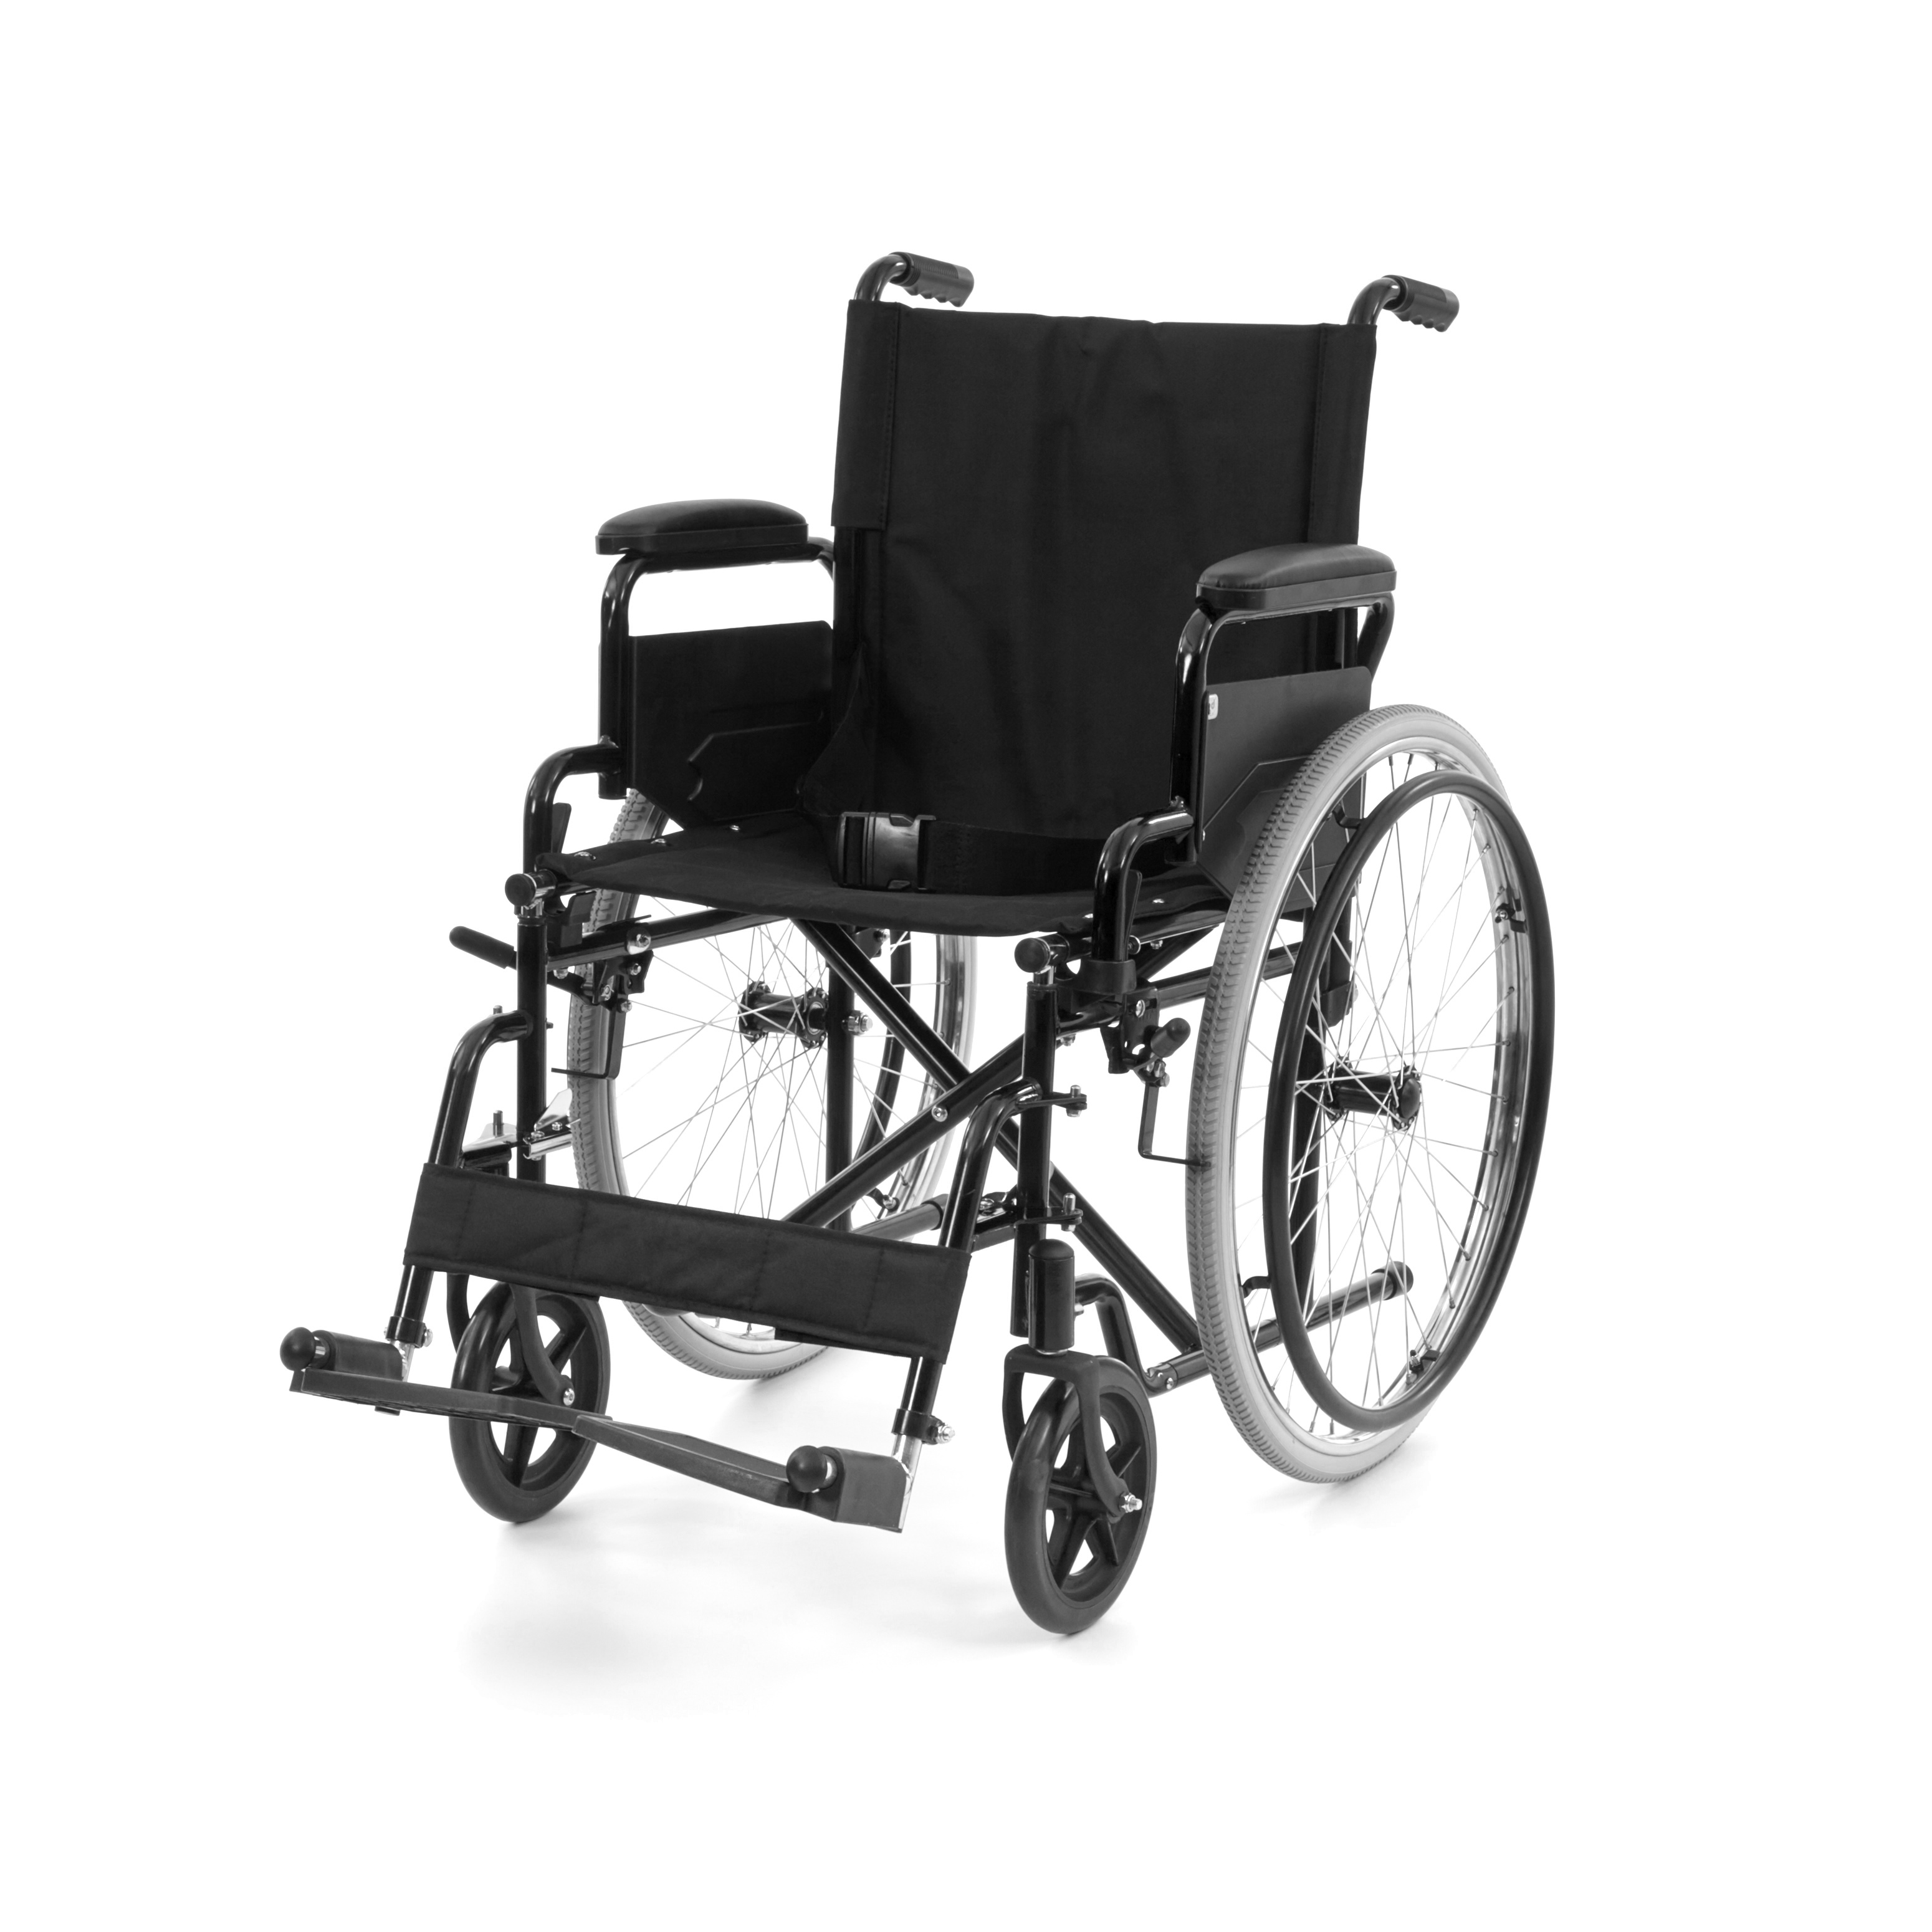 WHE-01-BLACK Romed foldable manual wheelchair, black, with flip-up armrest and swing away footrest, per piece in a carton.